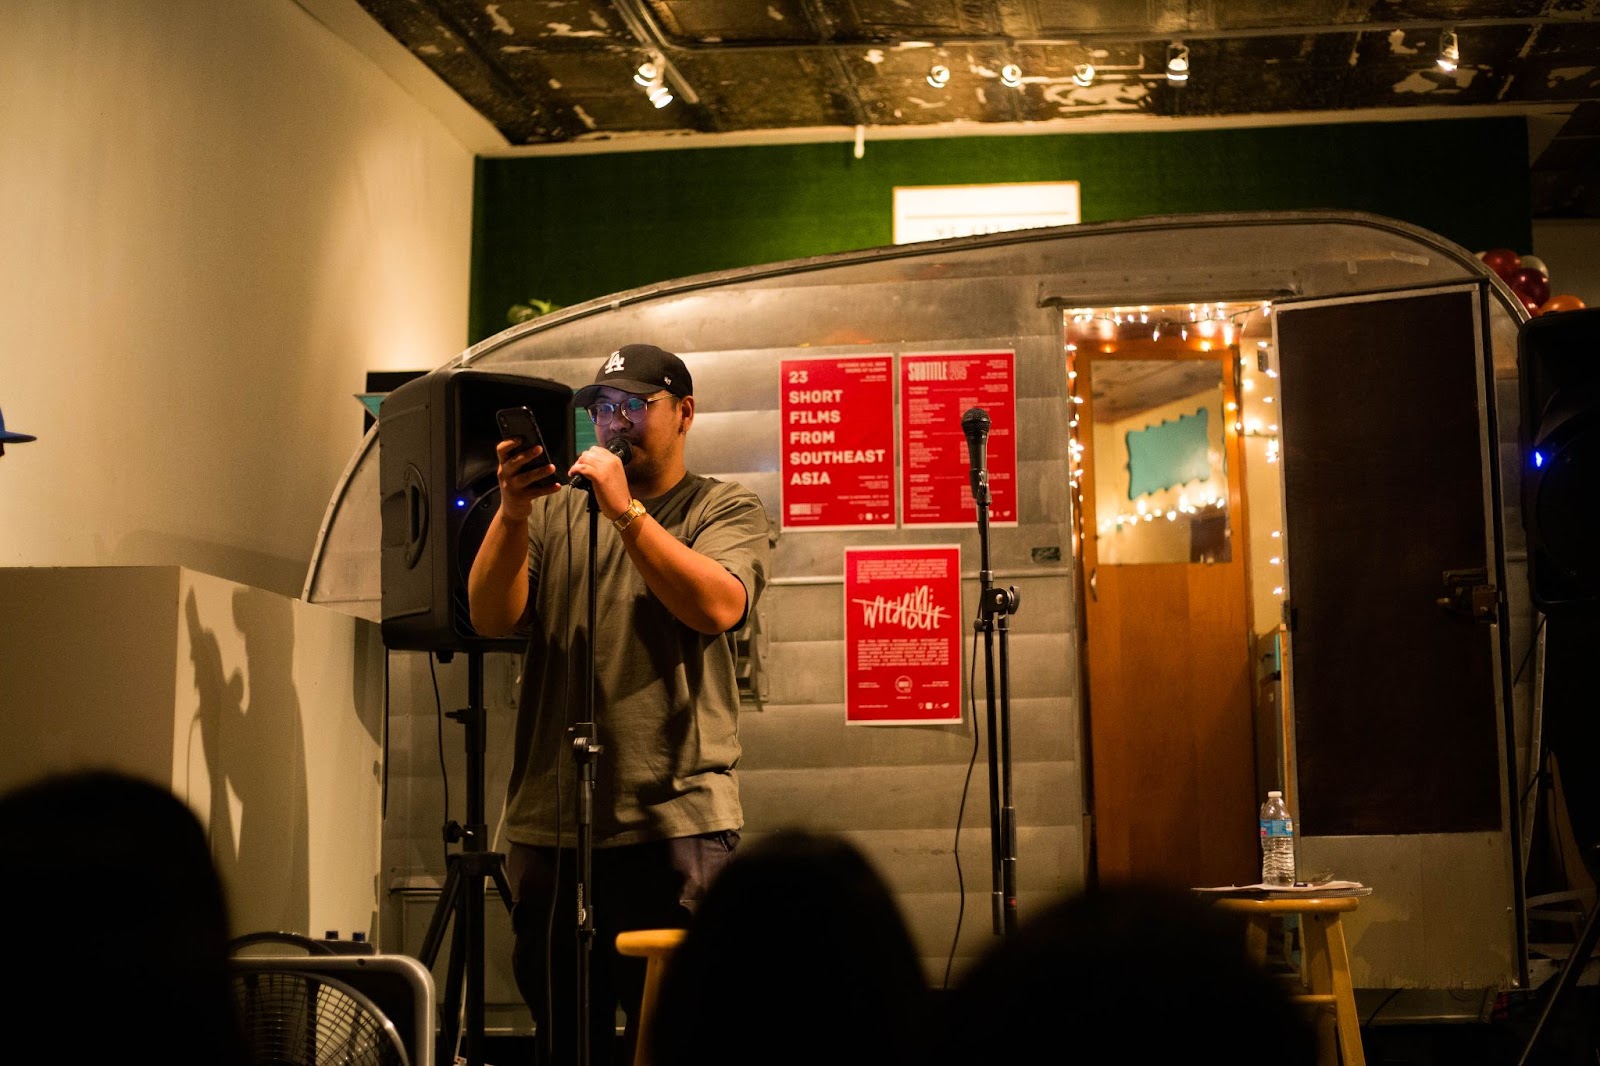 Image: Jofred Estilo performs at Luya at Isa Studios in Pilsen in October 2019. Jofred stands at a microphone reading off of a phone. There is what looks like an air stream-style trailer in the background. Photo by Caroline Olsen.